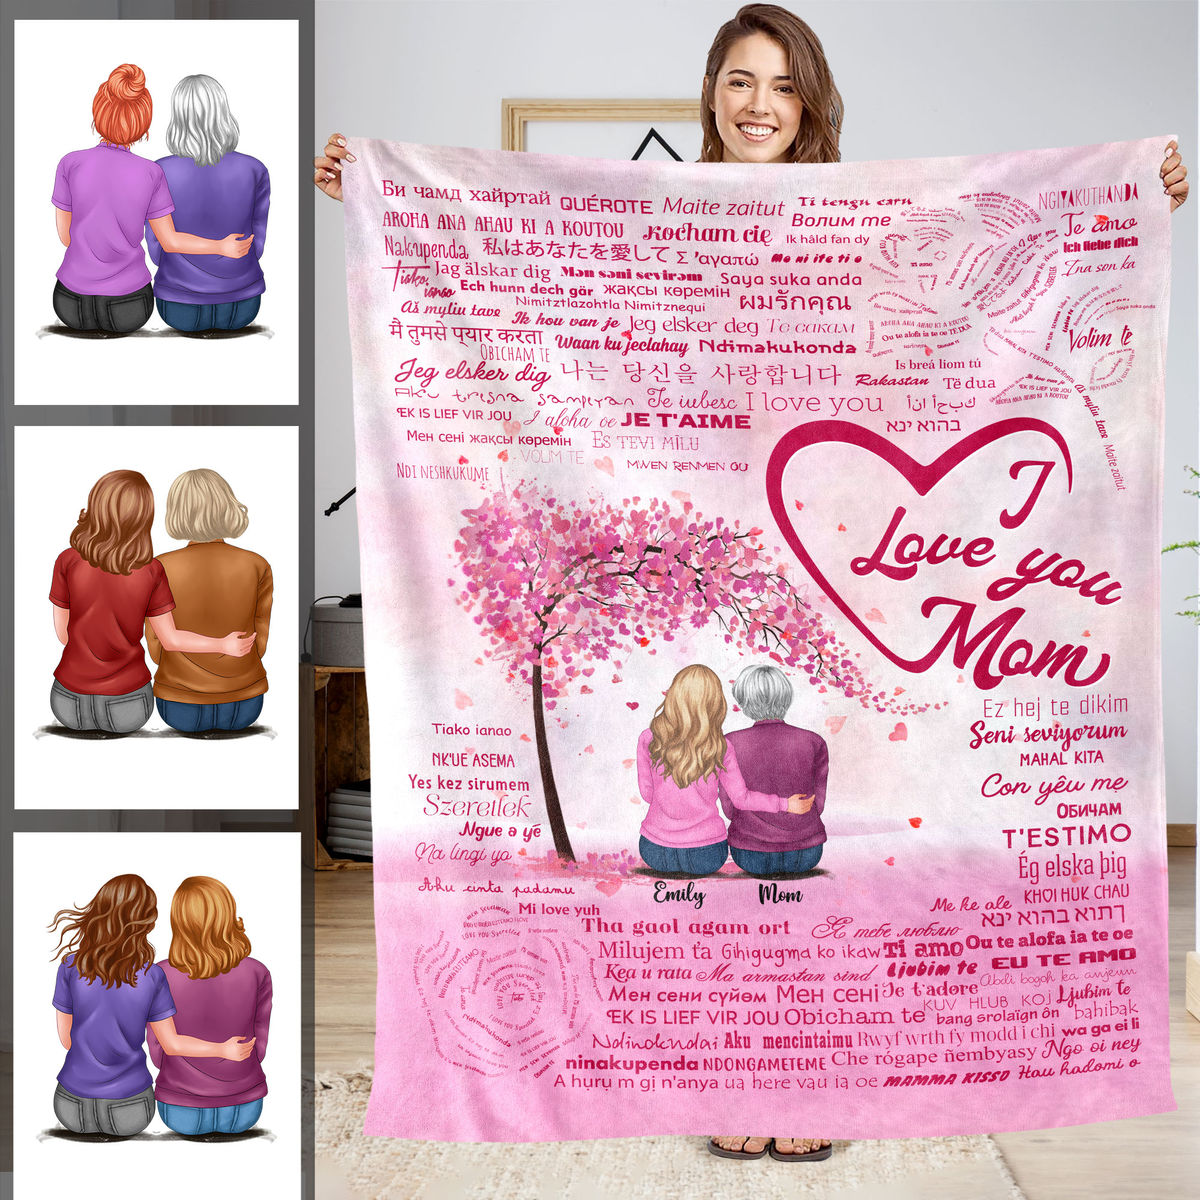 Mothers Day Blanket, Magnolia Mom Blanket, My Favorite People Call Me,  Personalized Blanket From Kids, Mother's Day Gift, We Love You Mom 